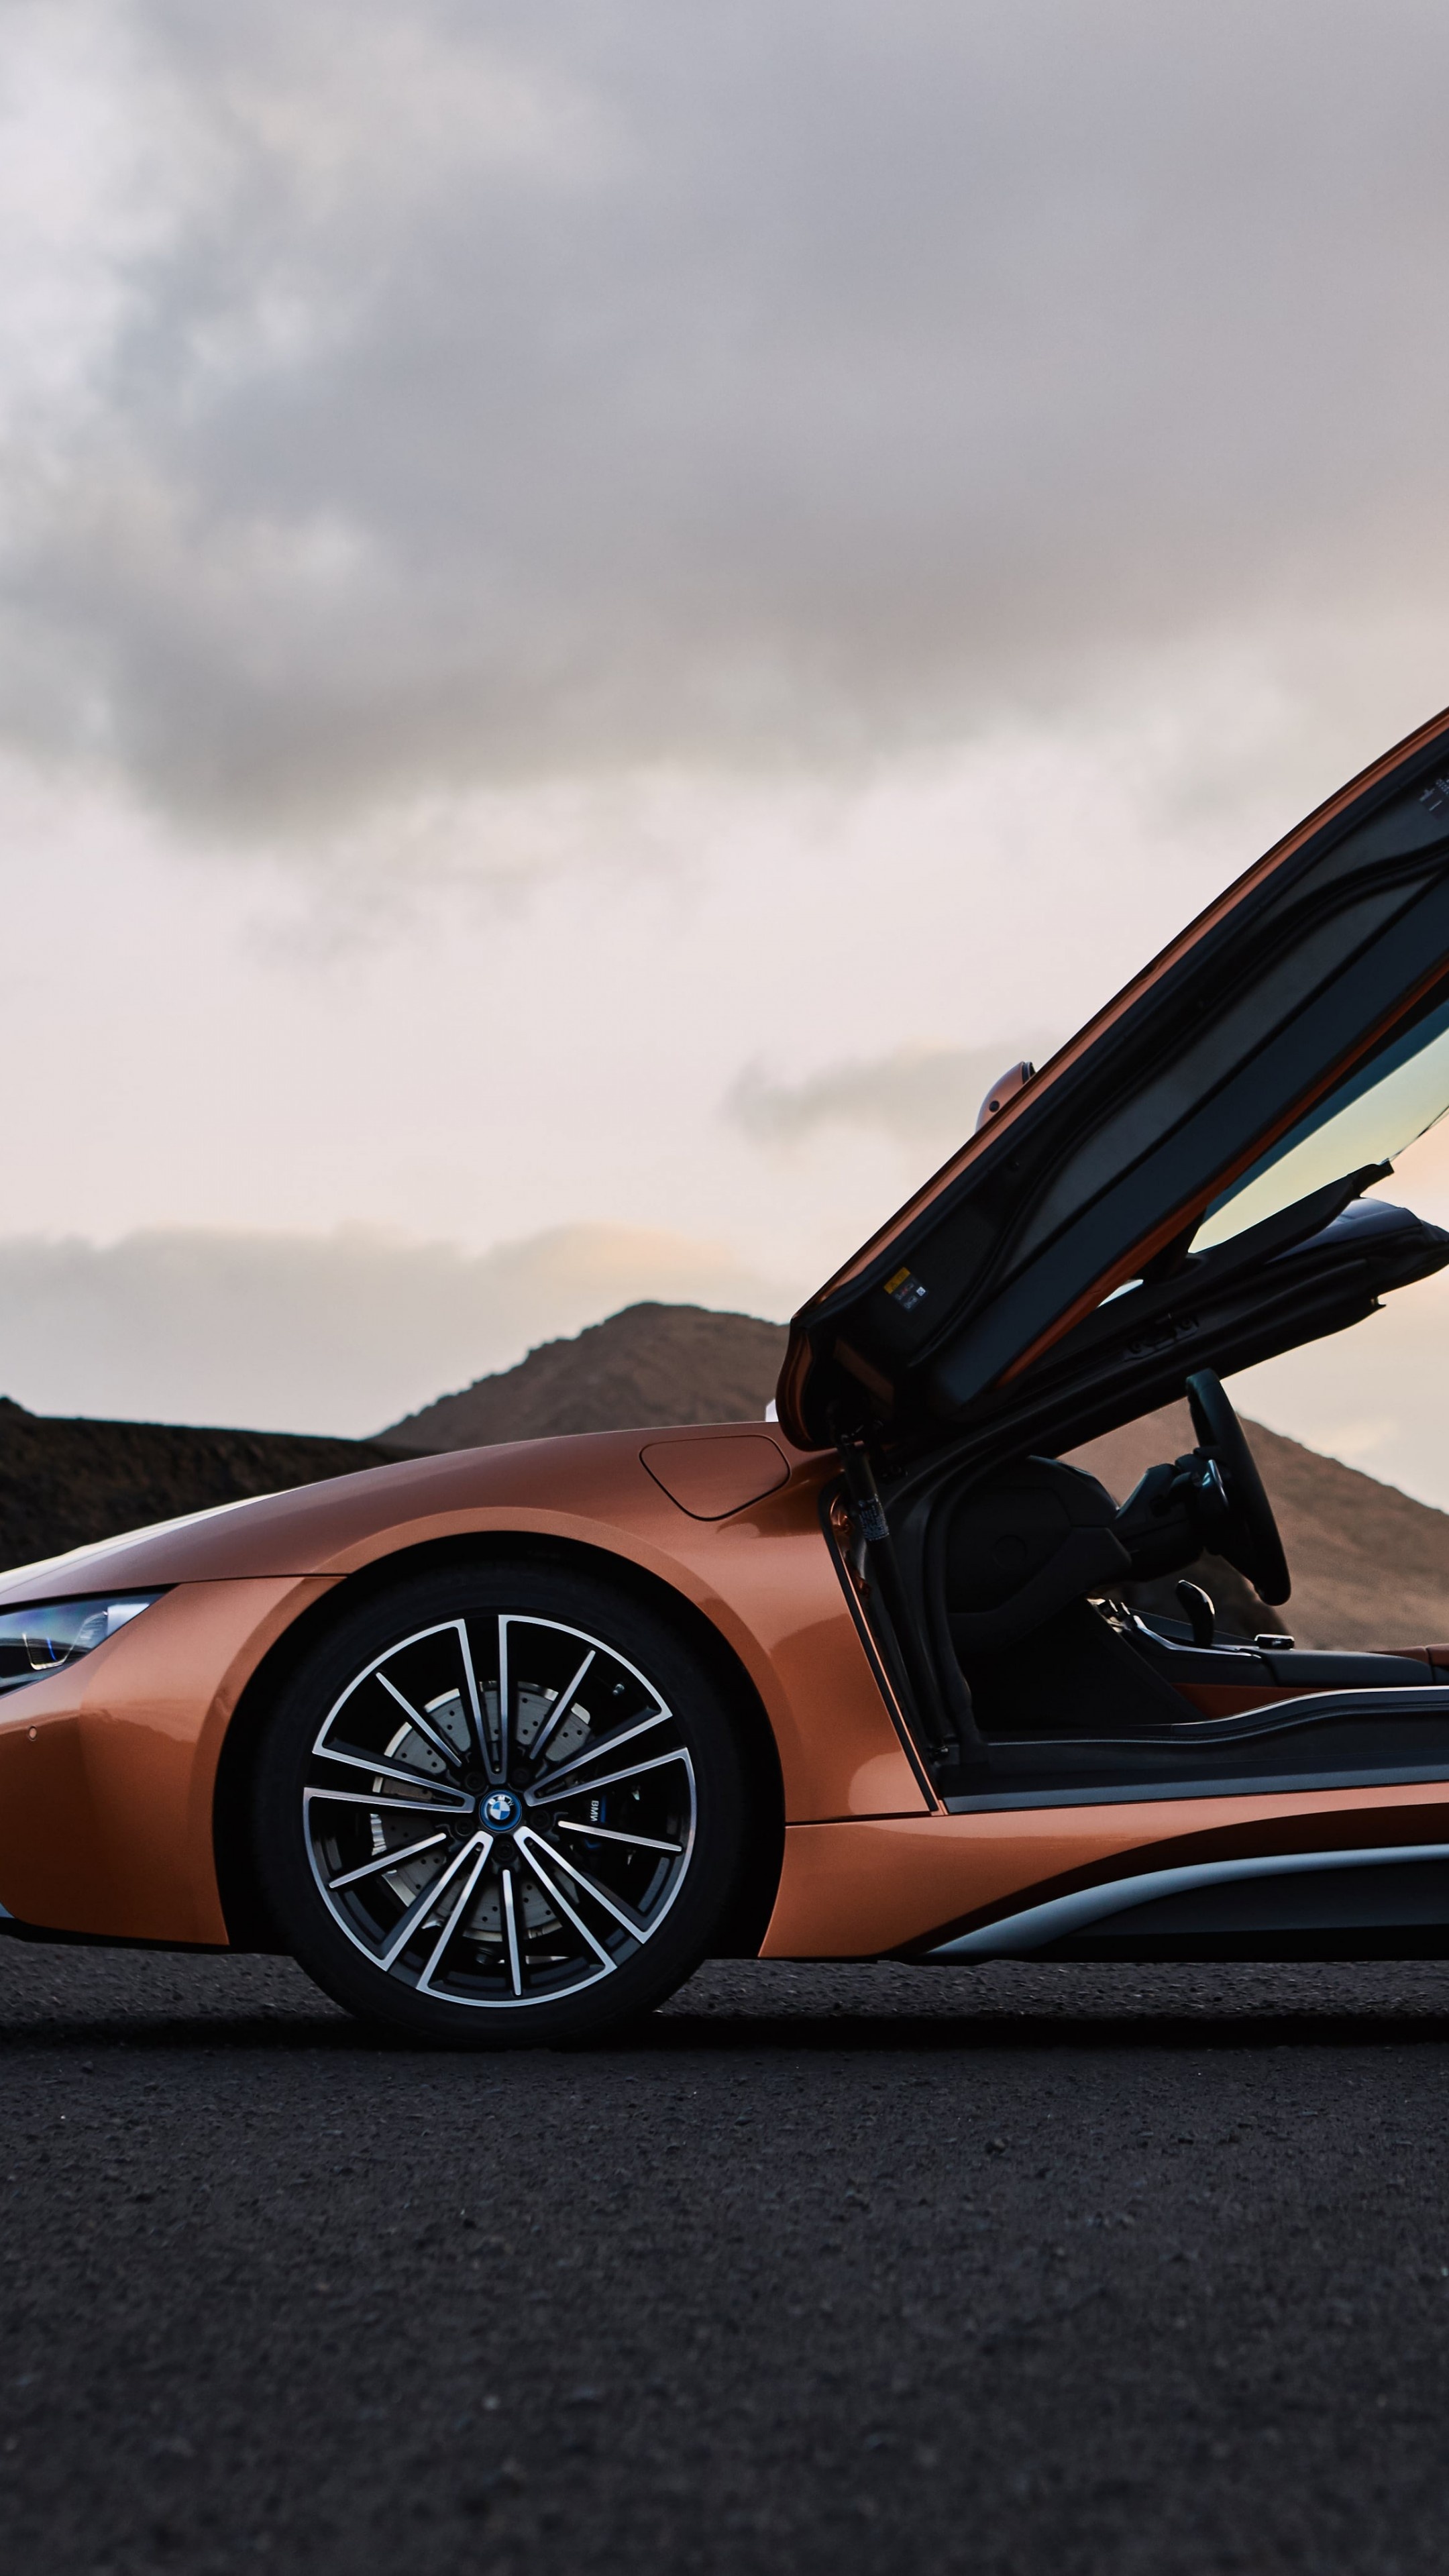 BMW i8, Roadster beauty, Open-top luxury, Unmatched performance, Jaw-dropping design, 2160x3840 4K Handy